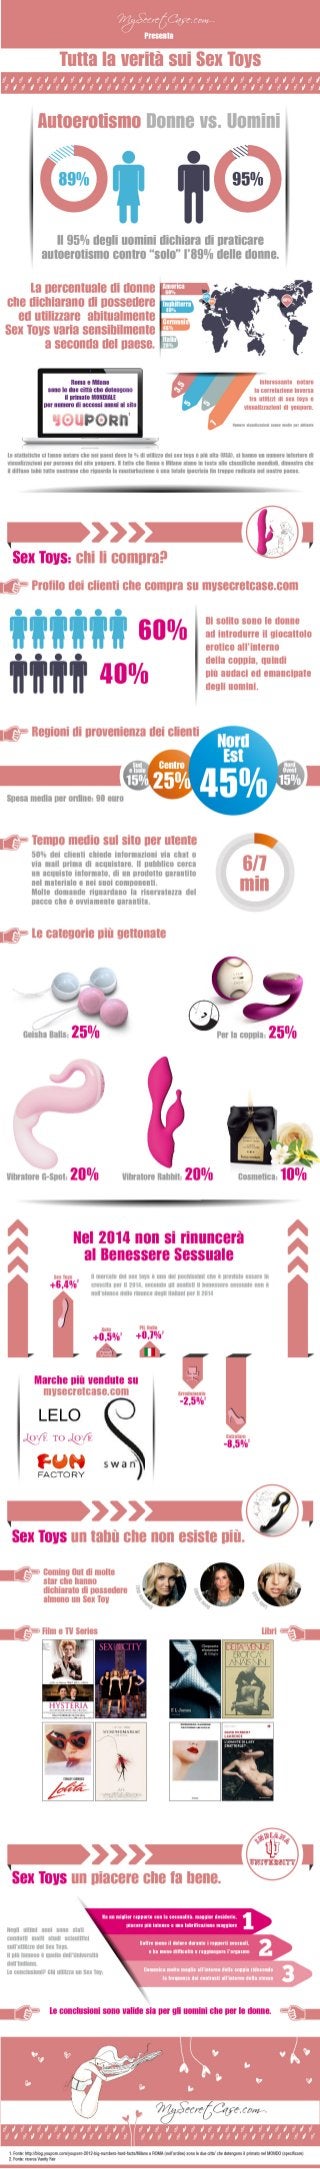 Infographic about sex toys utilization in Italy and in the world